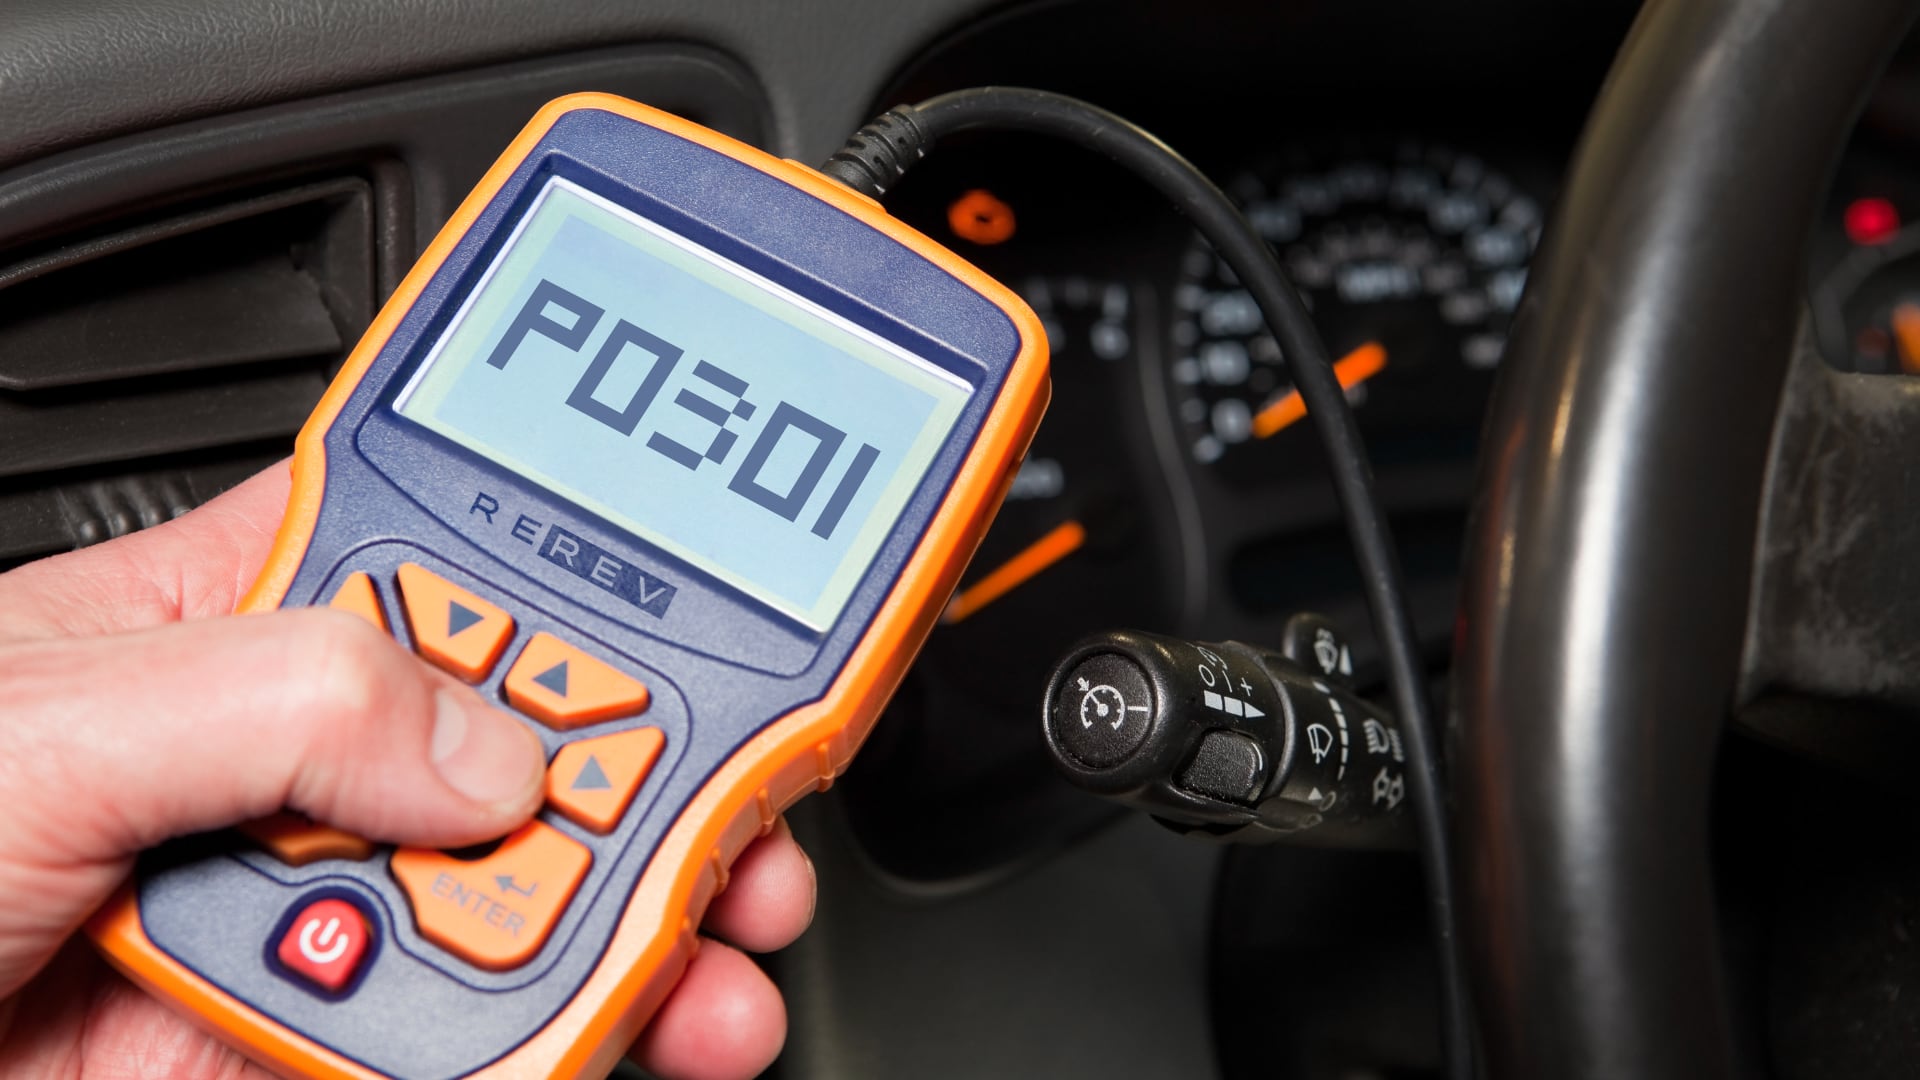 A person is holding a posiq device in a car.